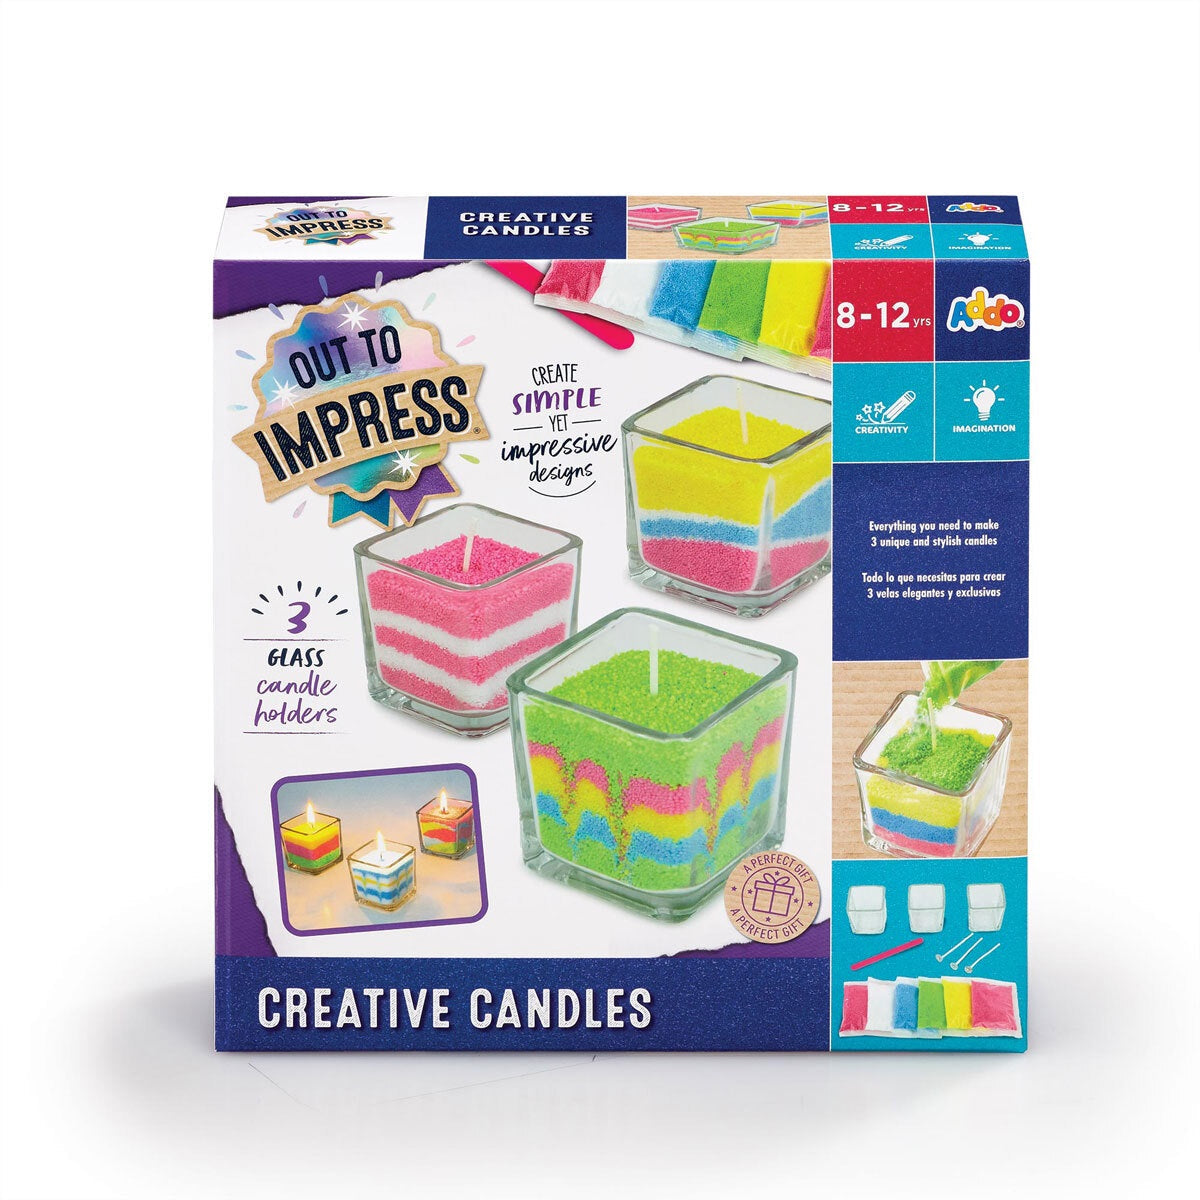 Out to Impress Creative Candles